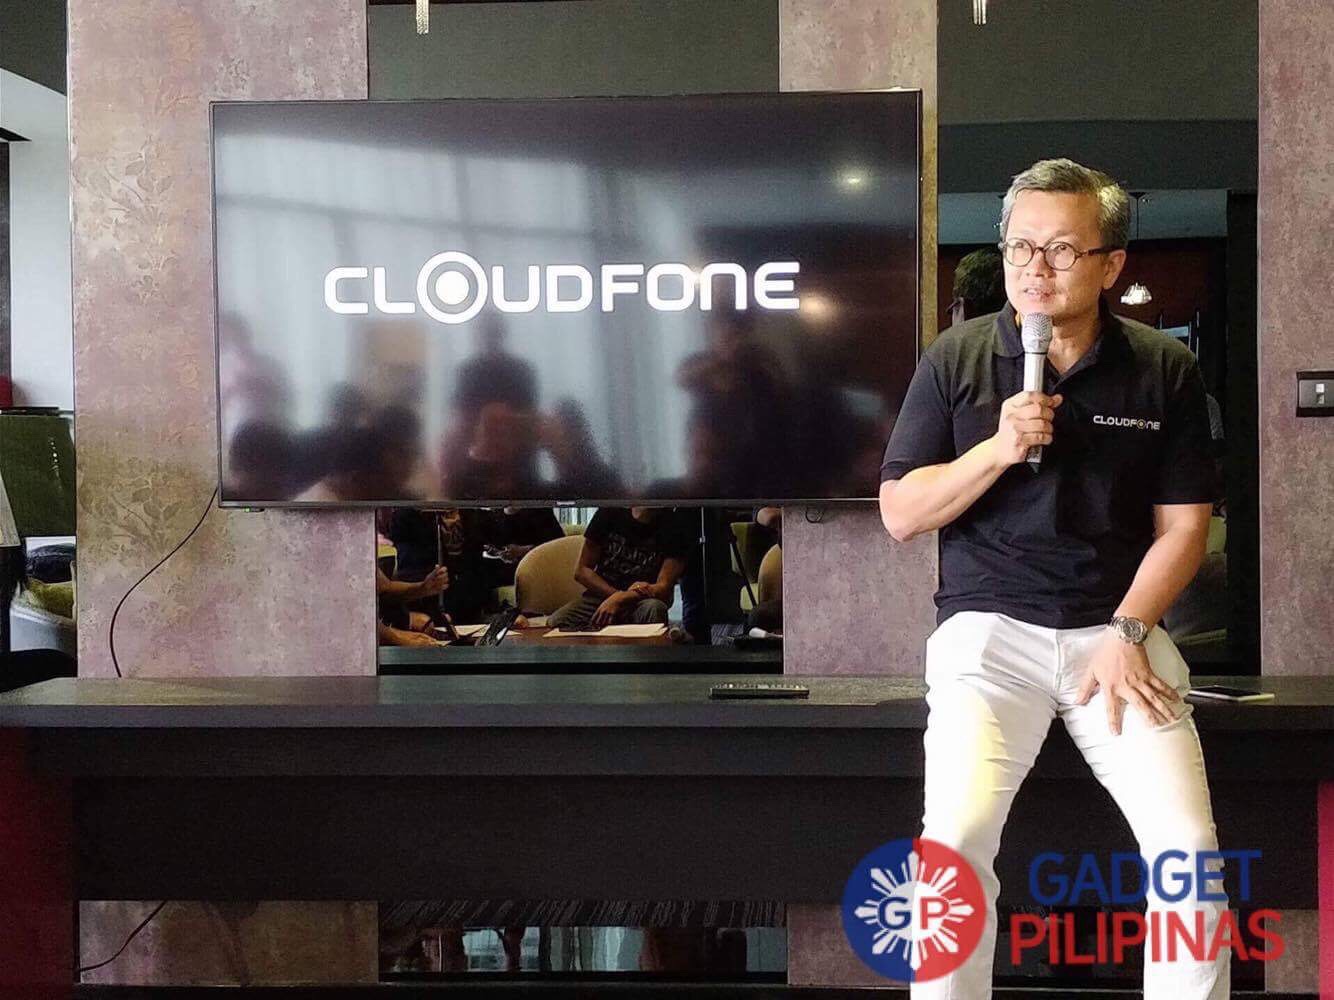 Low quality selfies? Cloudfone shifts to making phones with better cameras